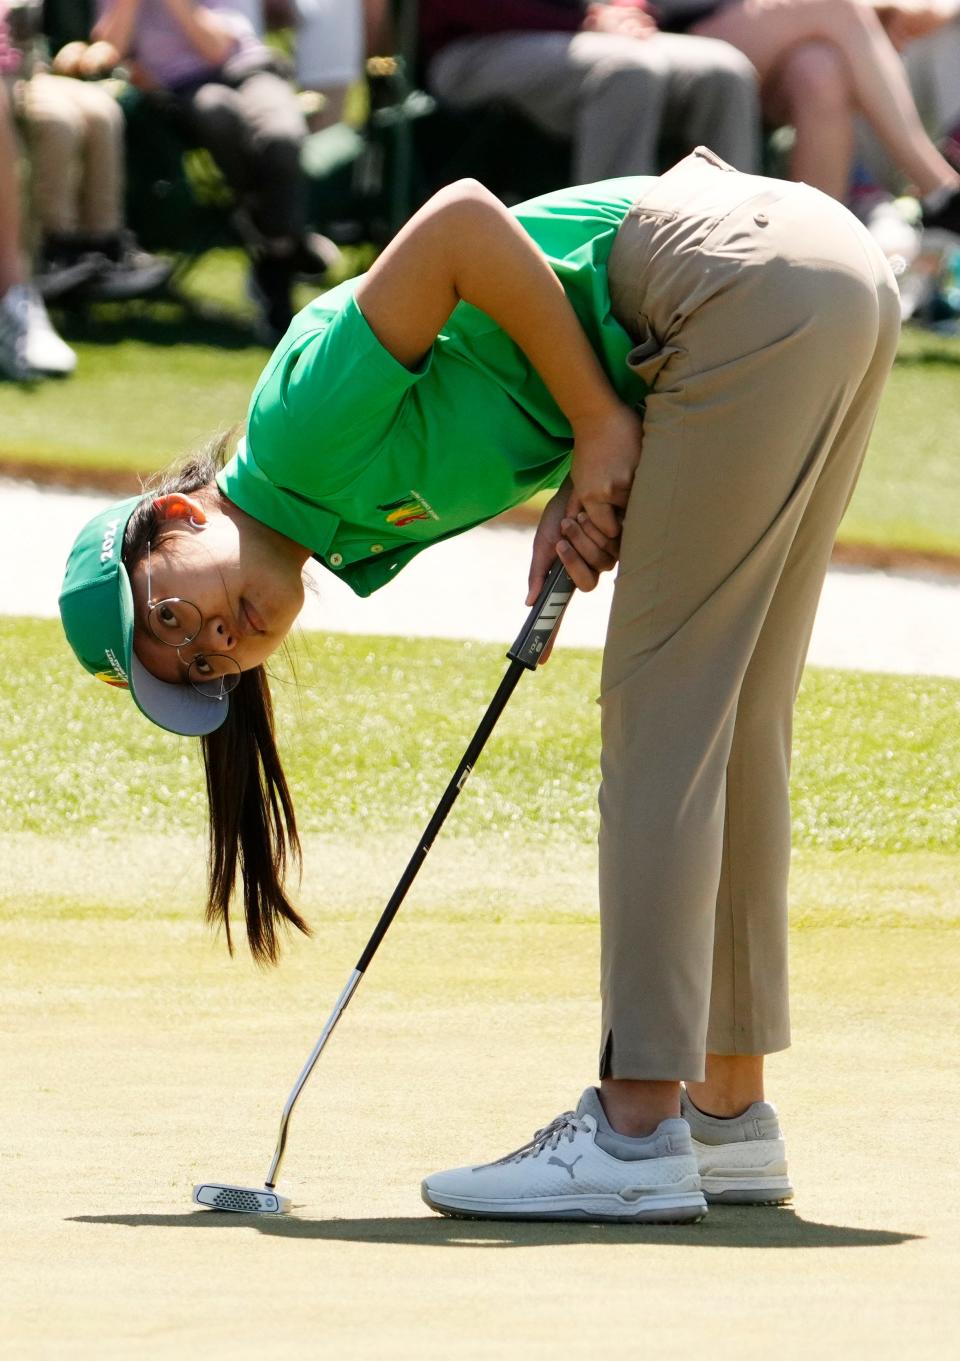 Champa Visetsin from Sudbury, Mass., watches one of her putts during the Drive, Chip & Putt National Finals competition at Augusta National Golf Club.